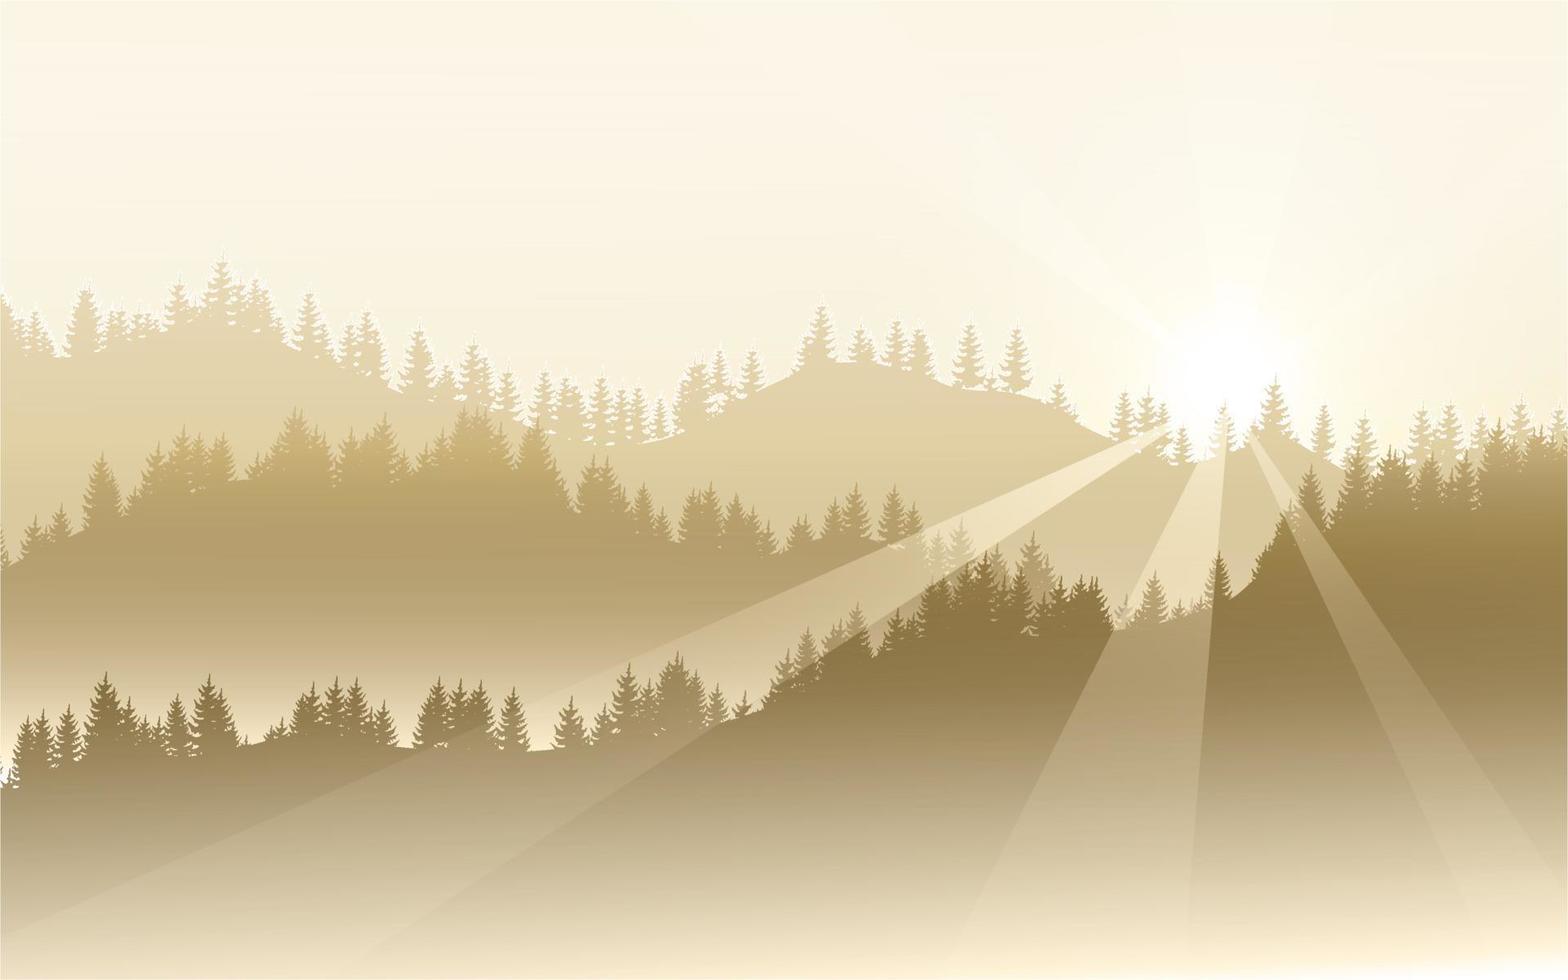 Pine forest foggy morning abstract landscape vector